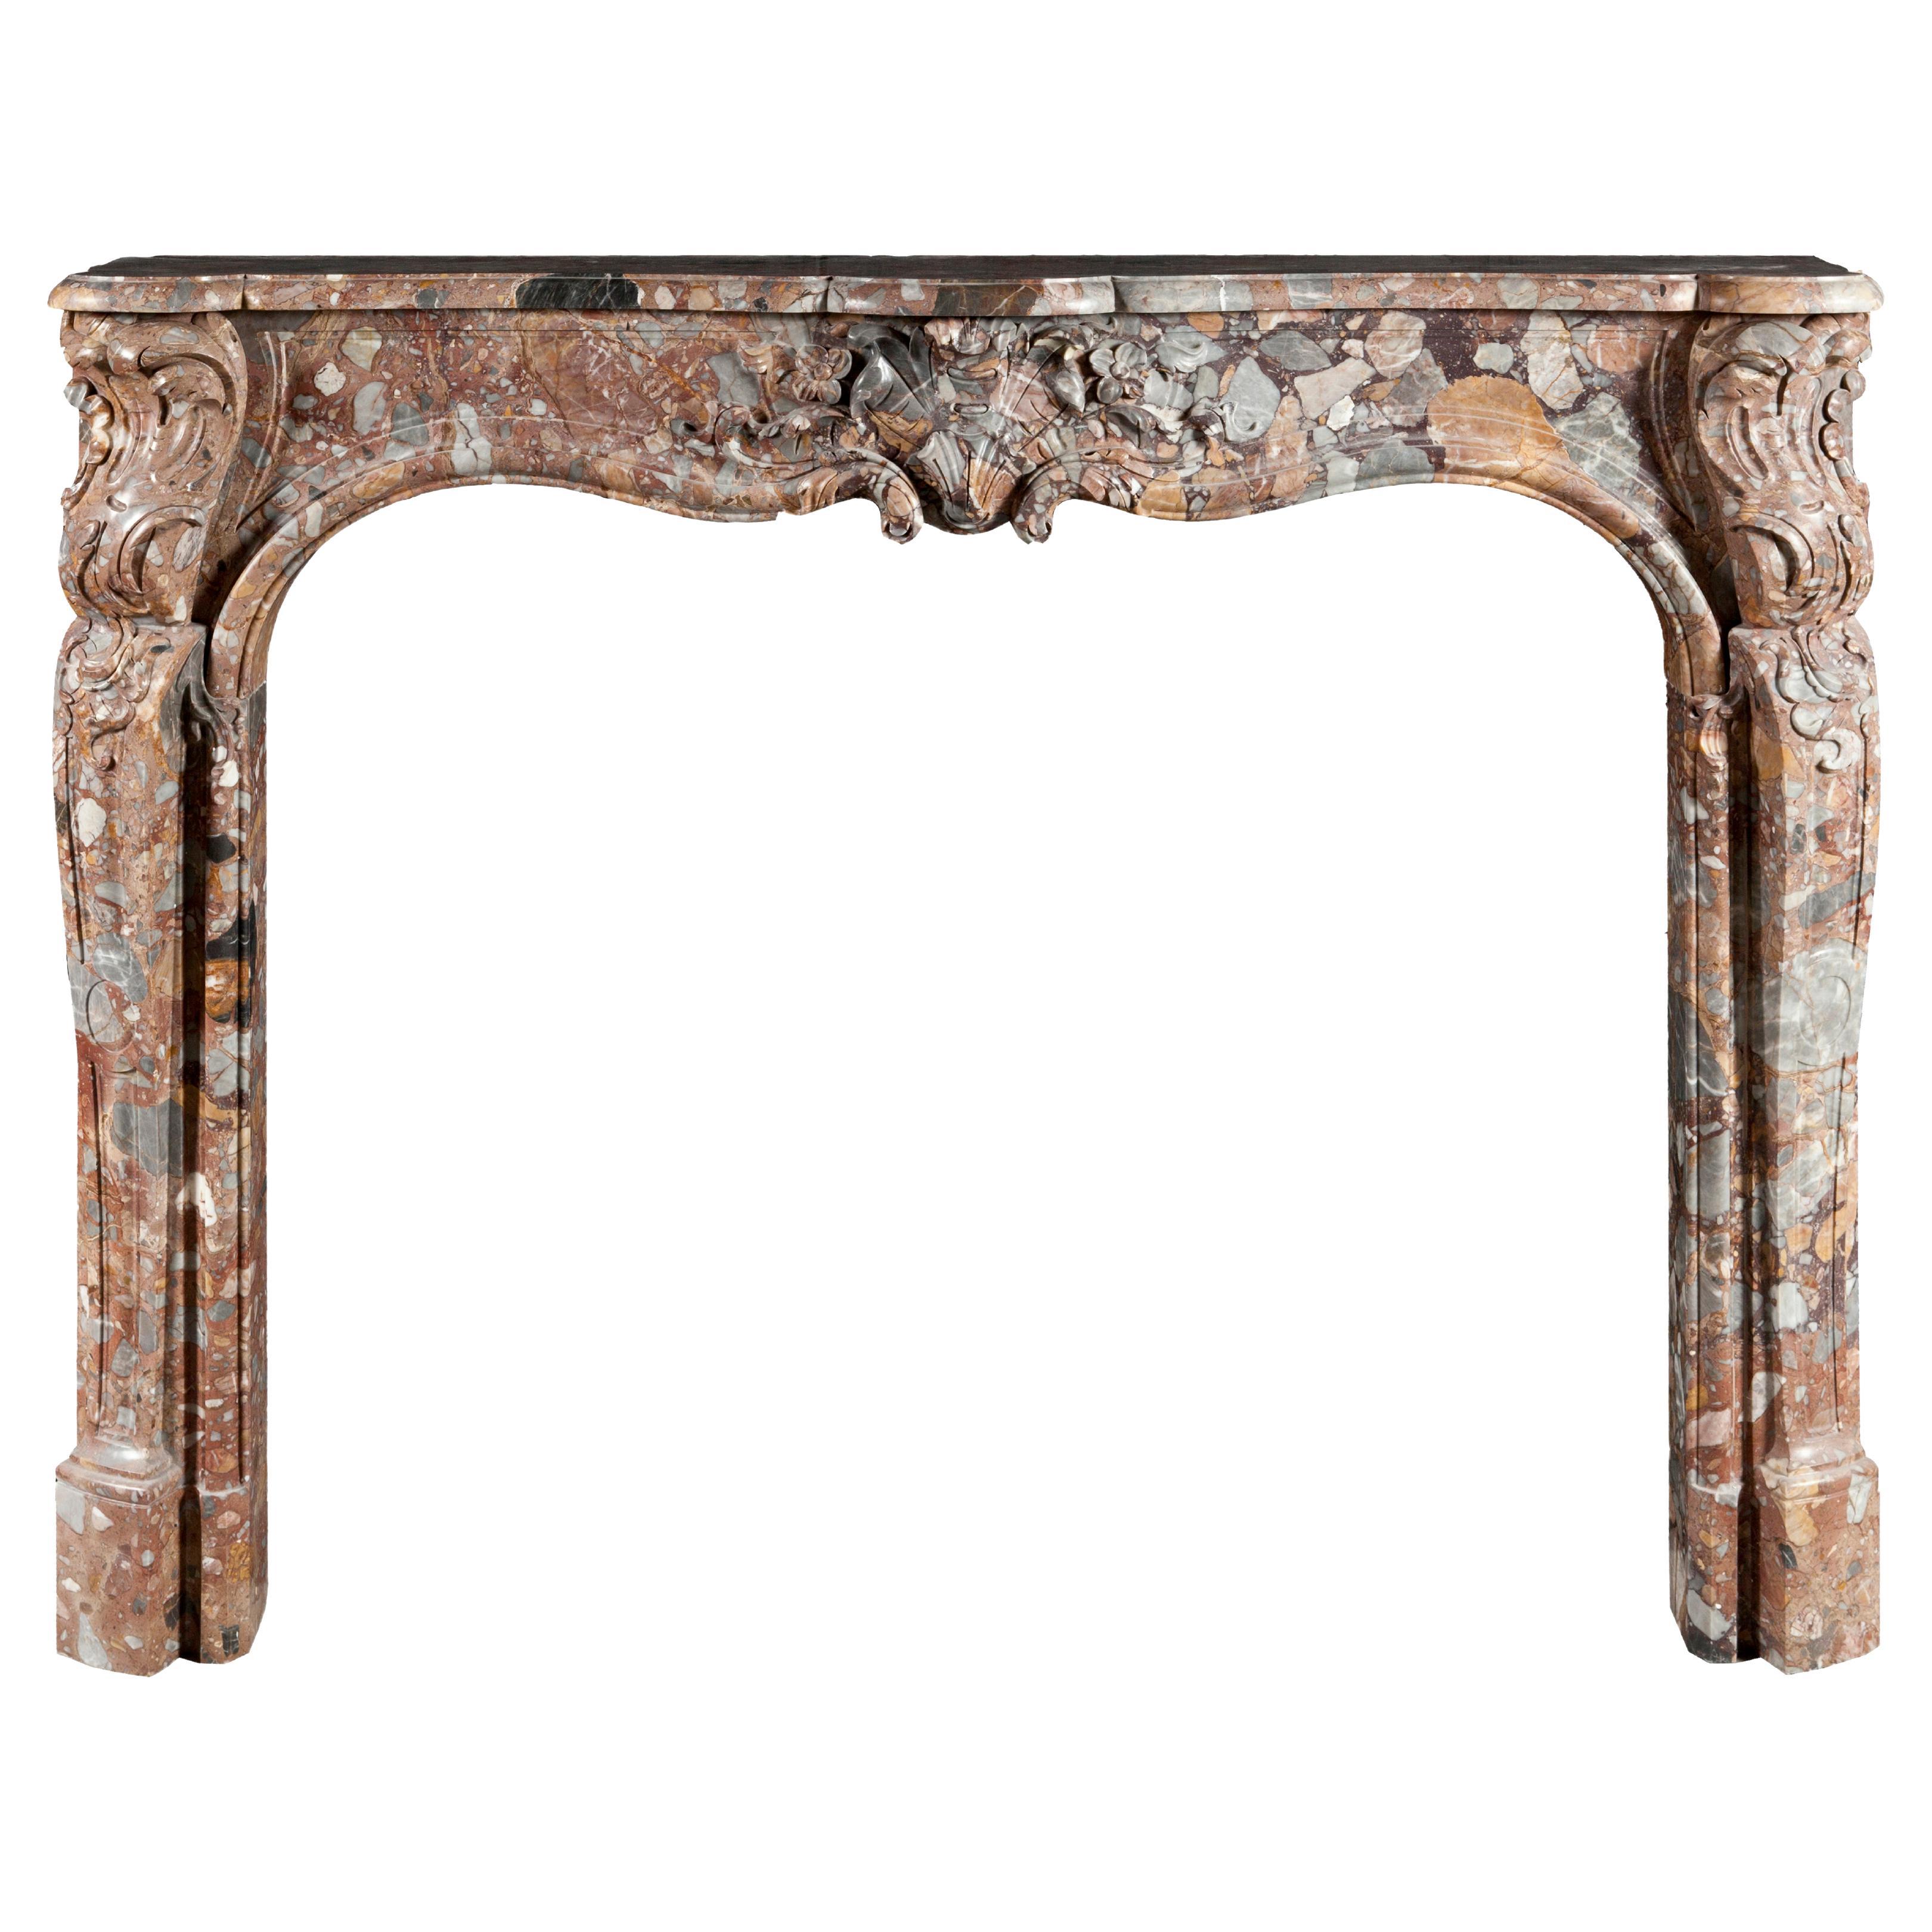 French Louis XV style marble fireplace For Sale